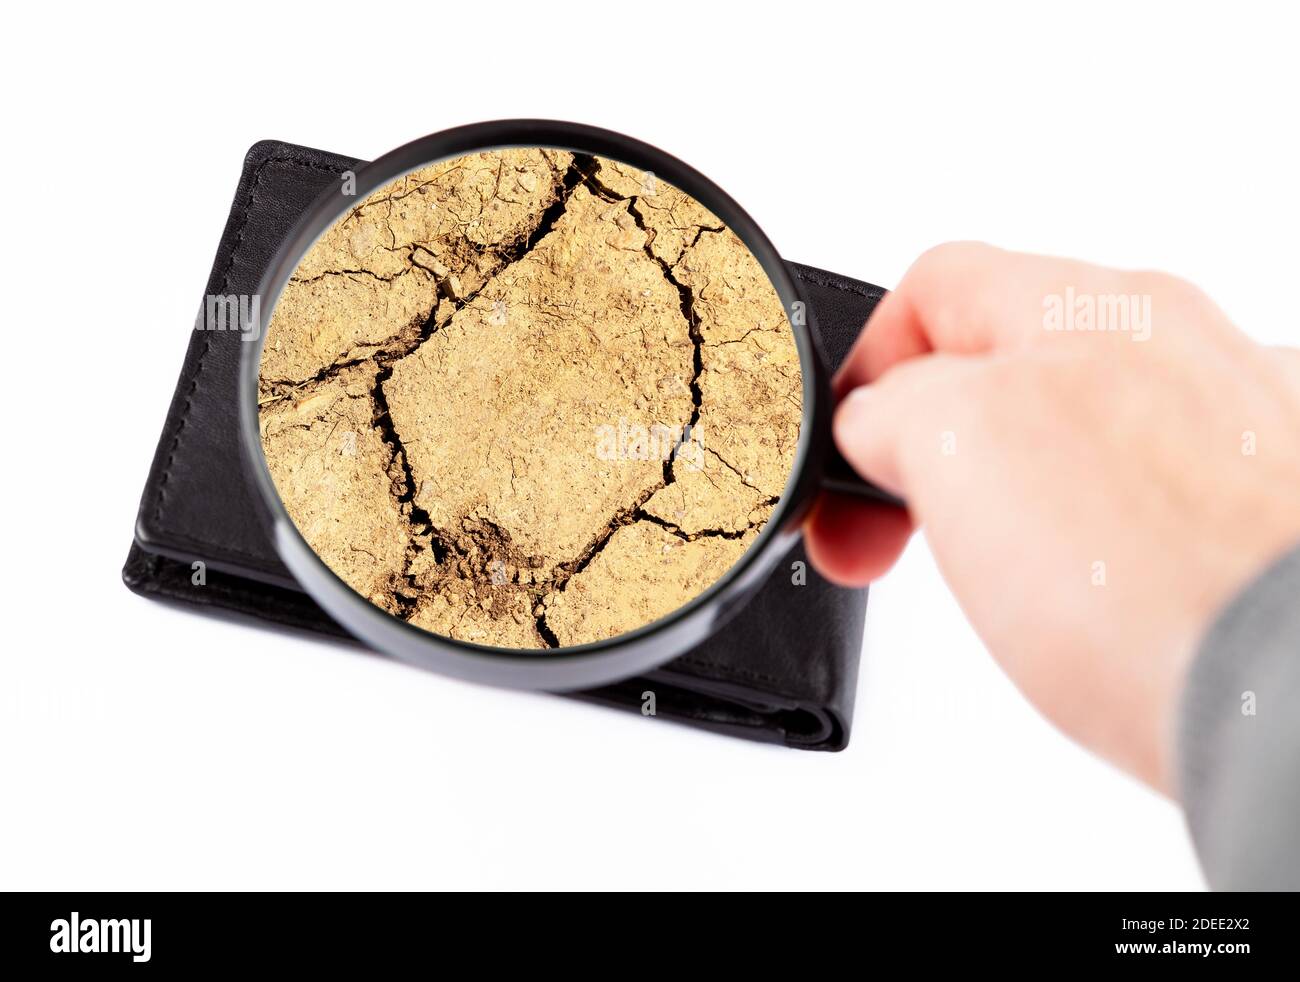 Empty wallet, no money left, drought, cracked dry earth inside. Poverty, economy financial crisis abstract concept. Personal finances dried out Stock Photo